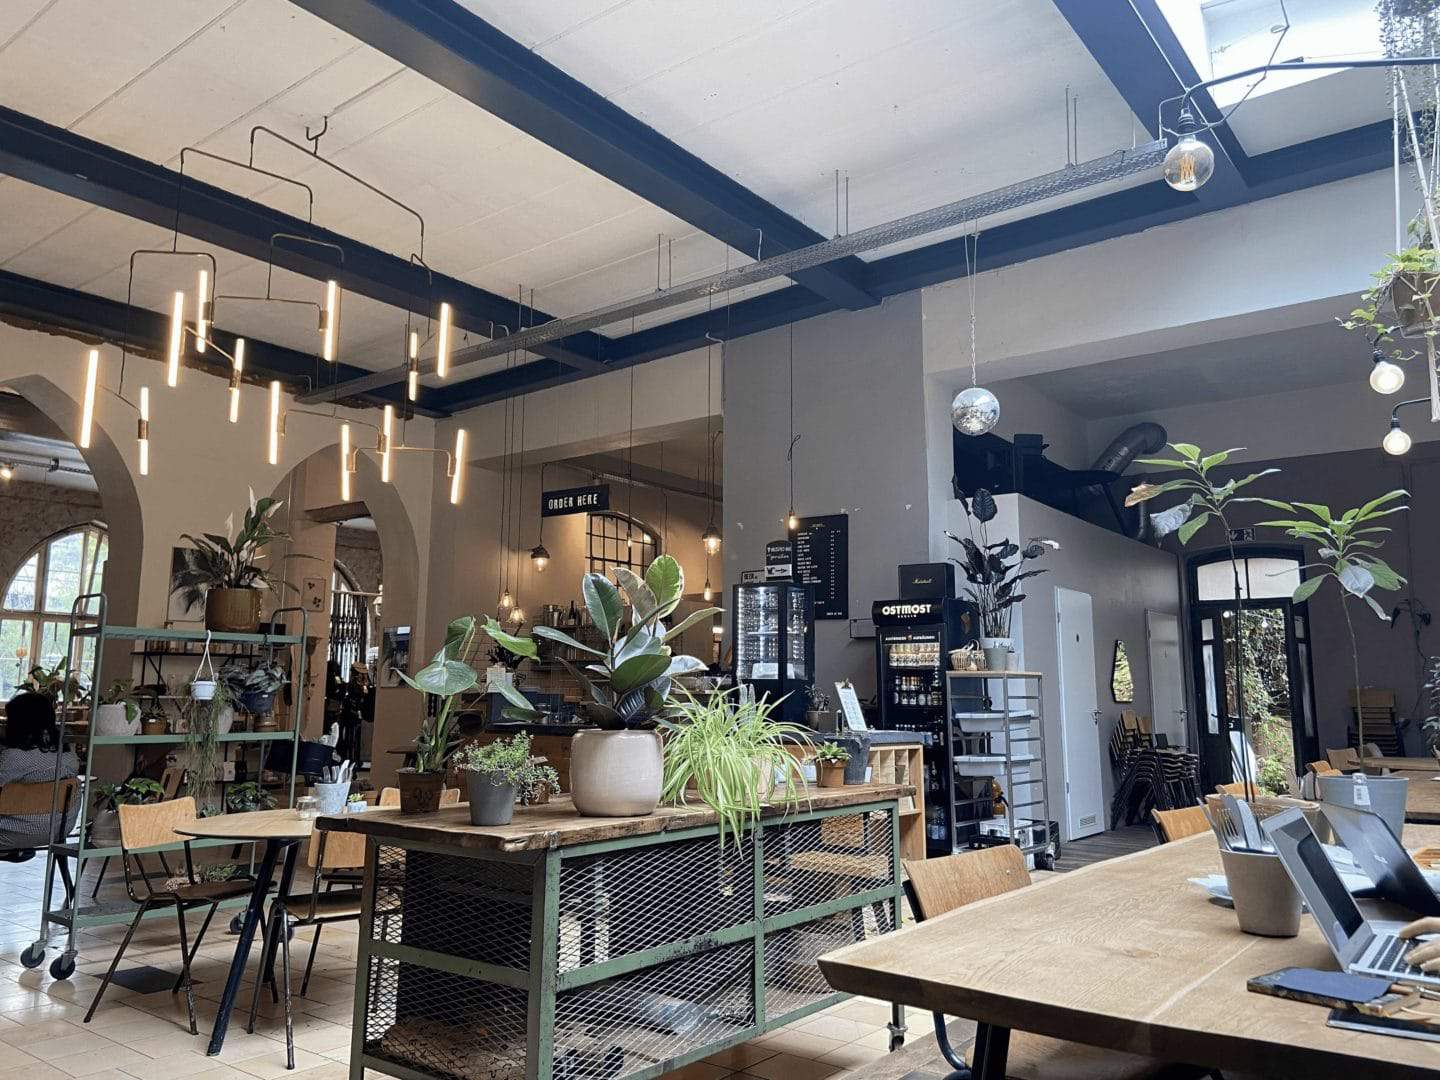 Interior view of Hallesches Haus, one of the best cafes to work in Berlin.